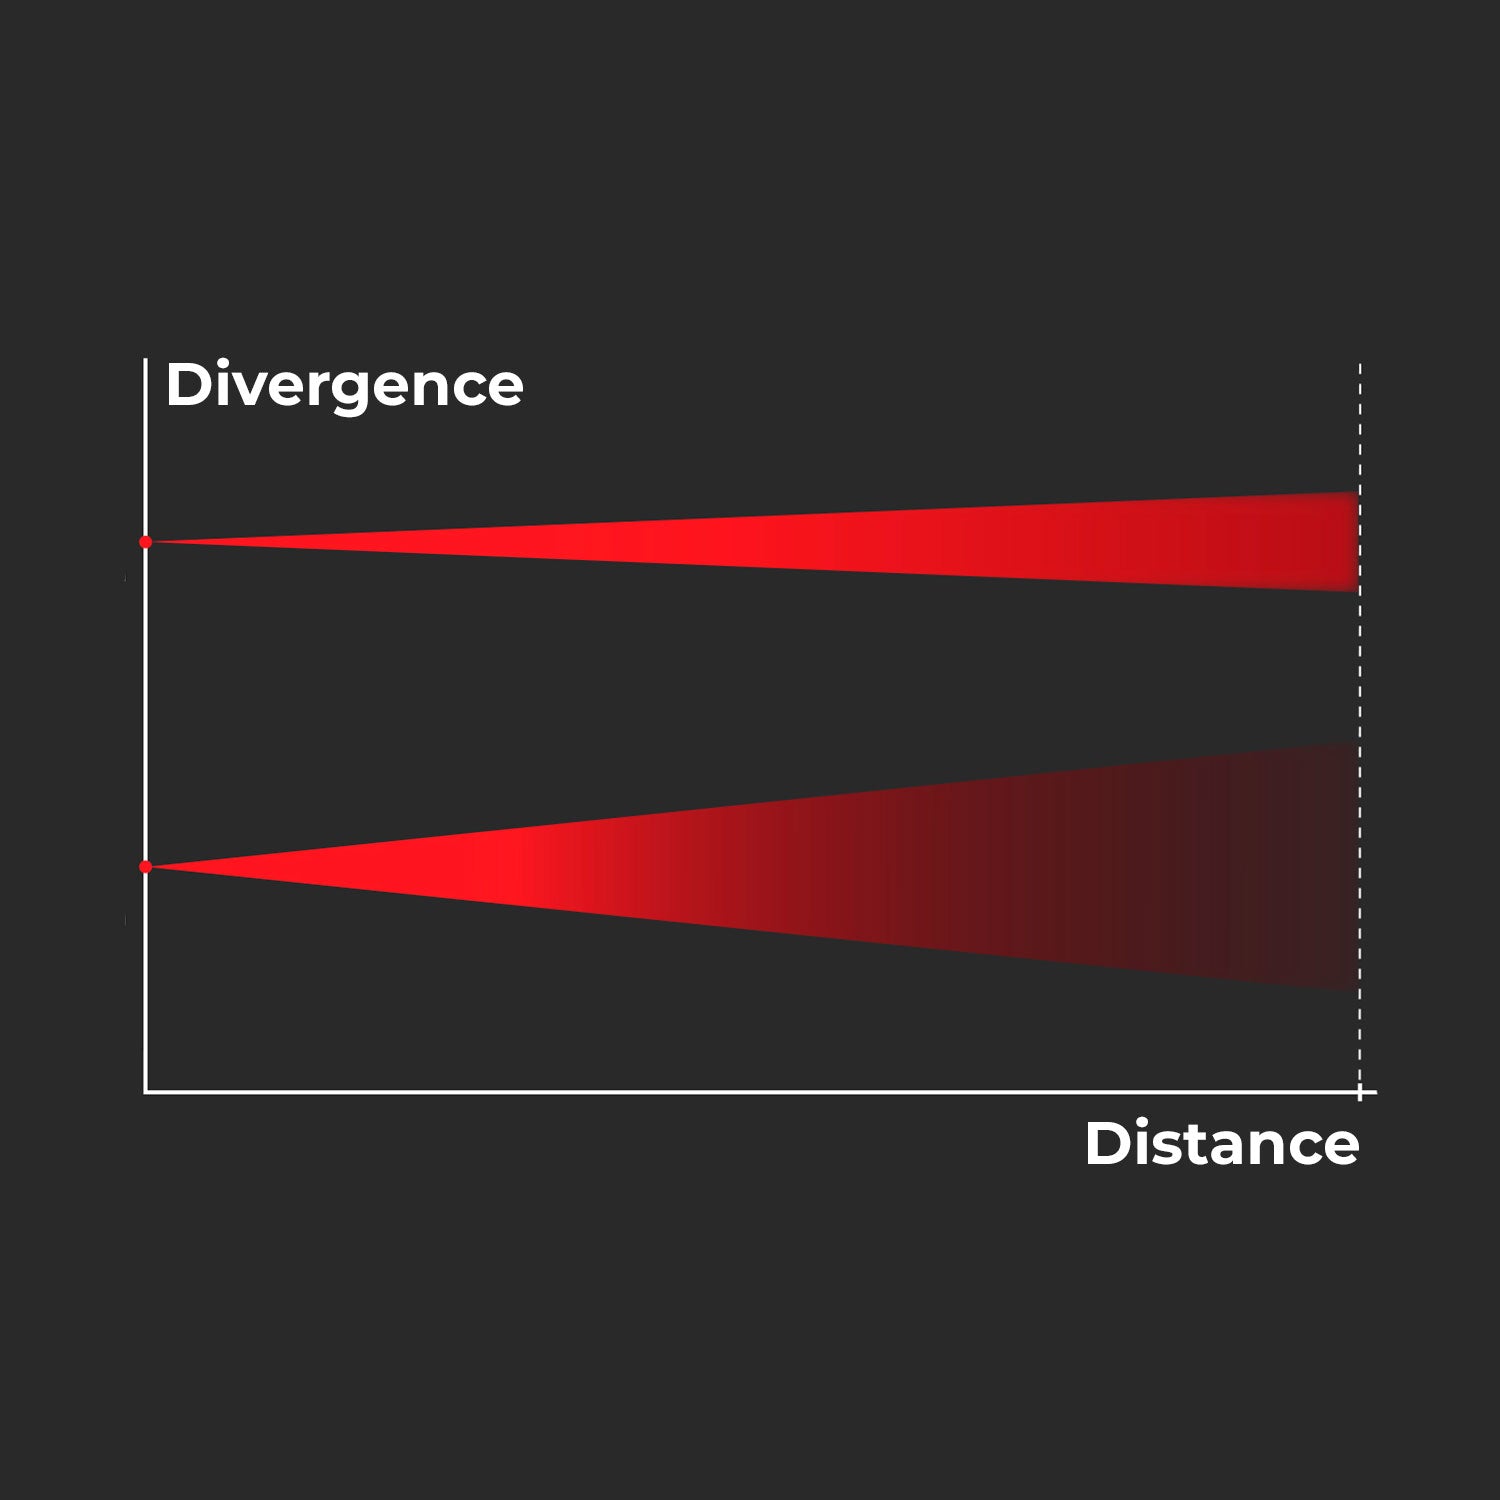 Laser divergence and its effect on brightness over distance